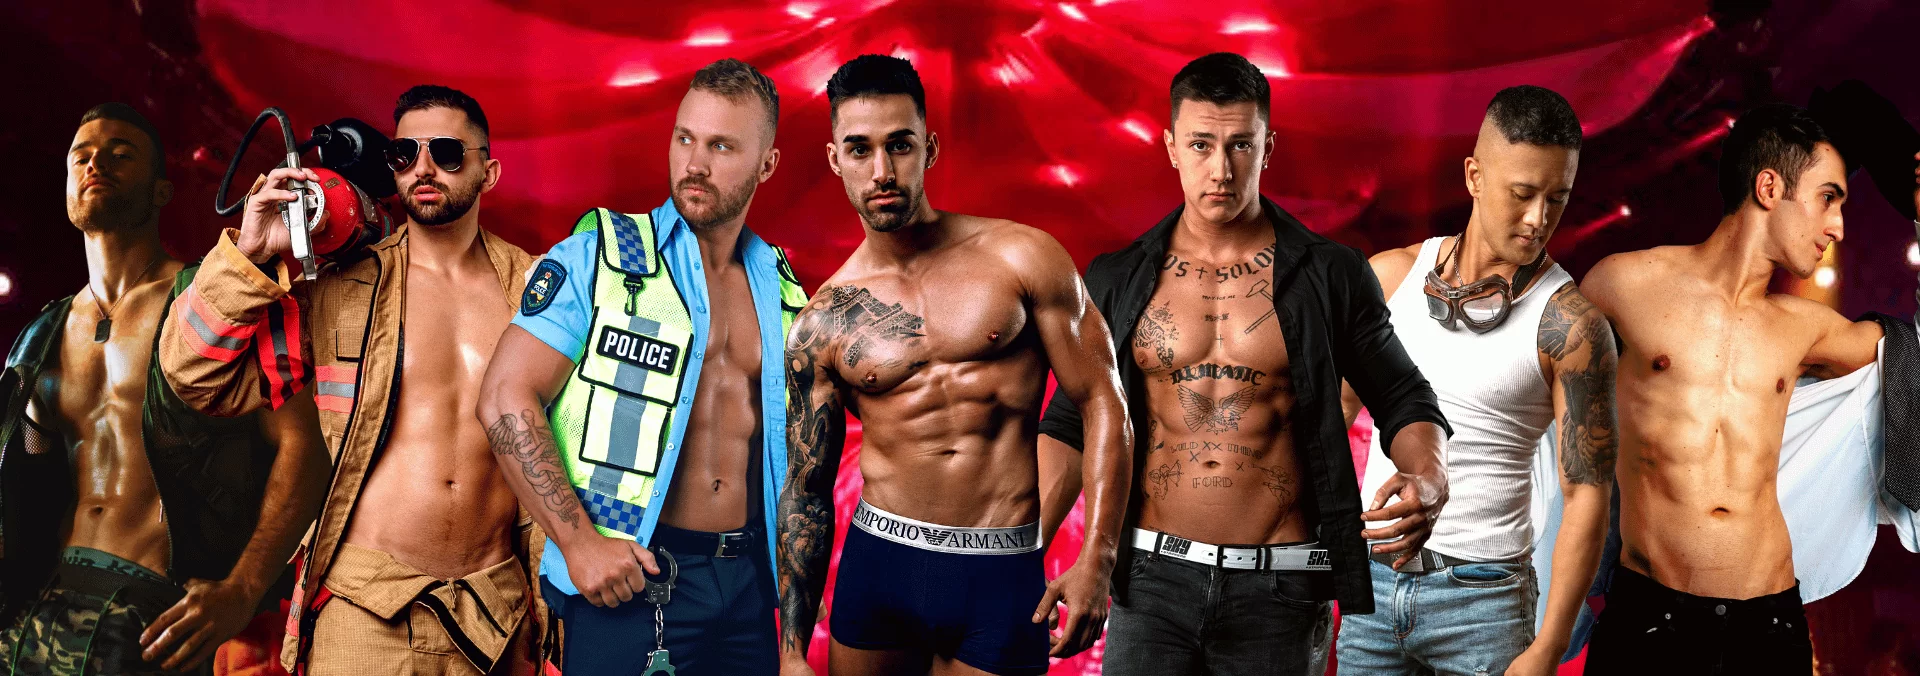 Male Strippers Dancing On Stage At Melbourne Strip Club